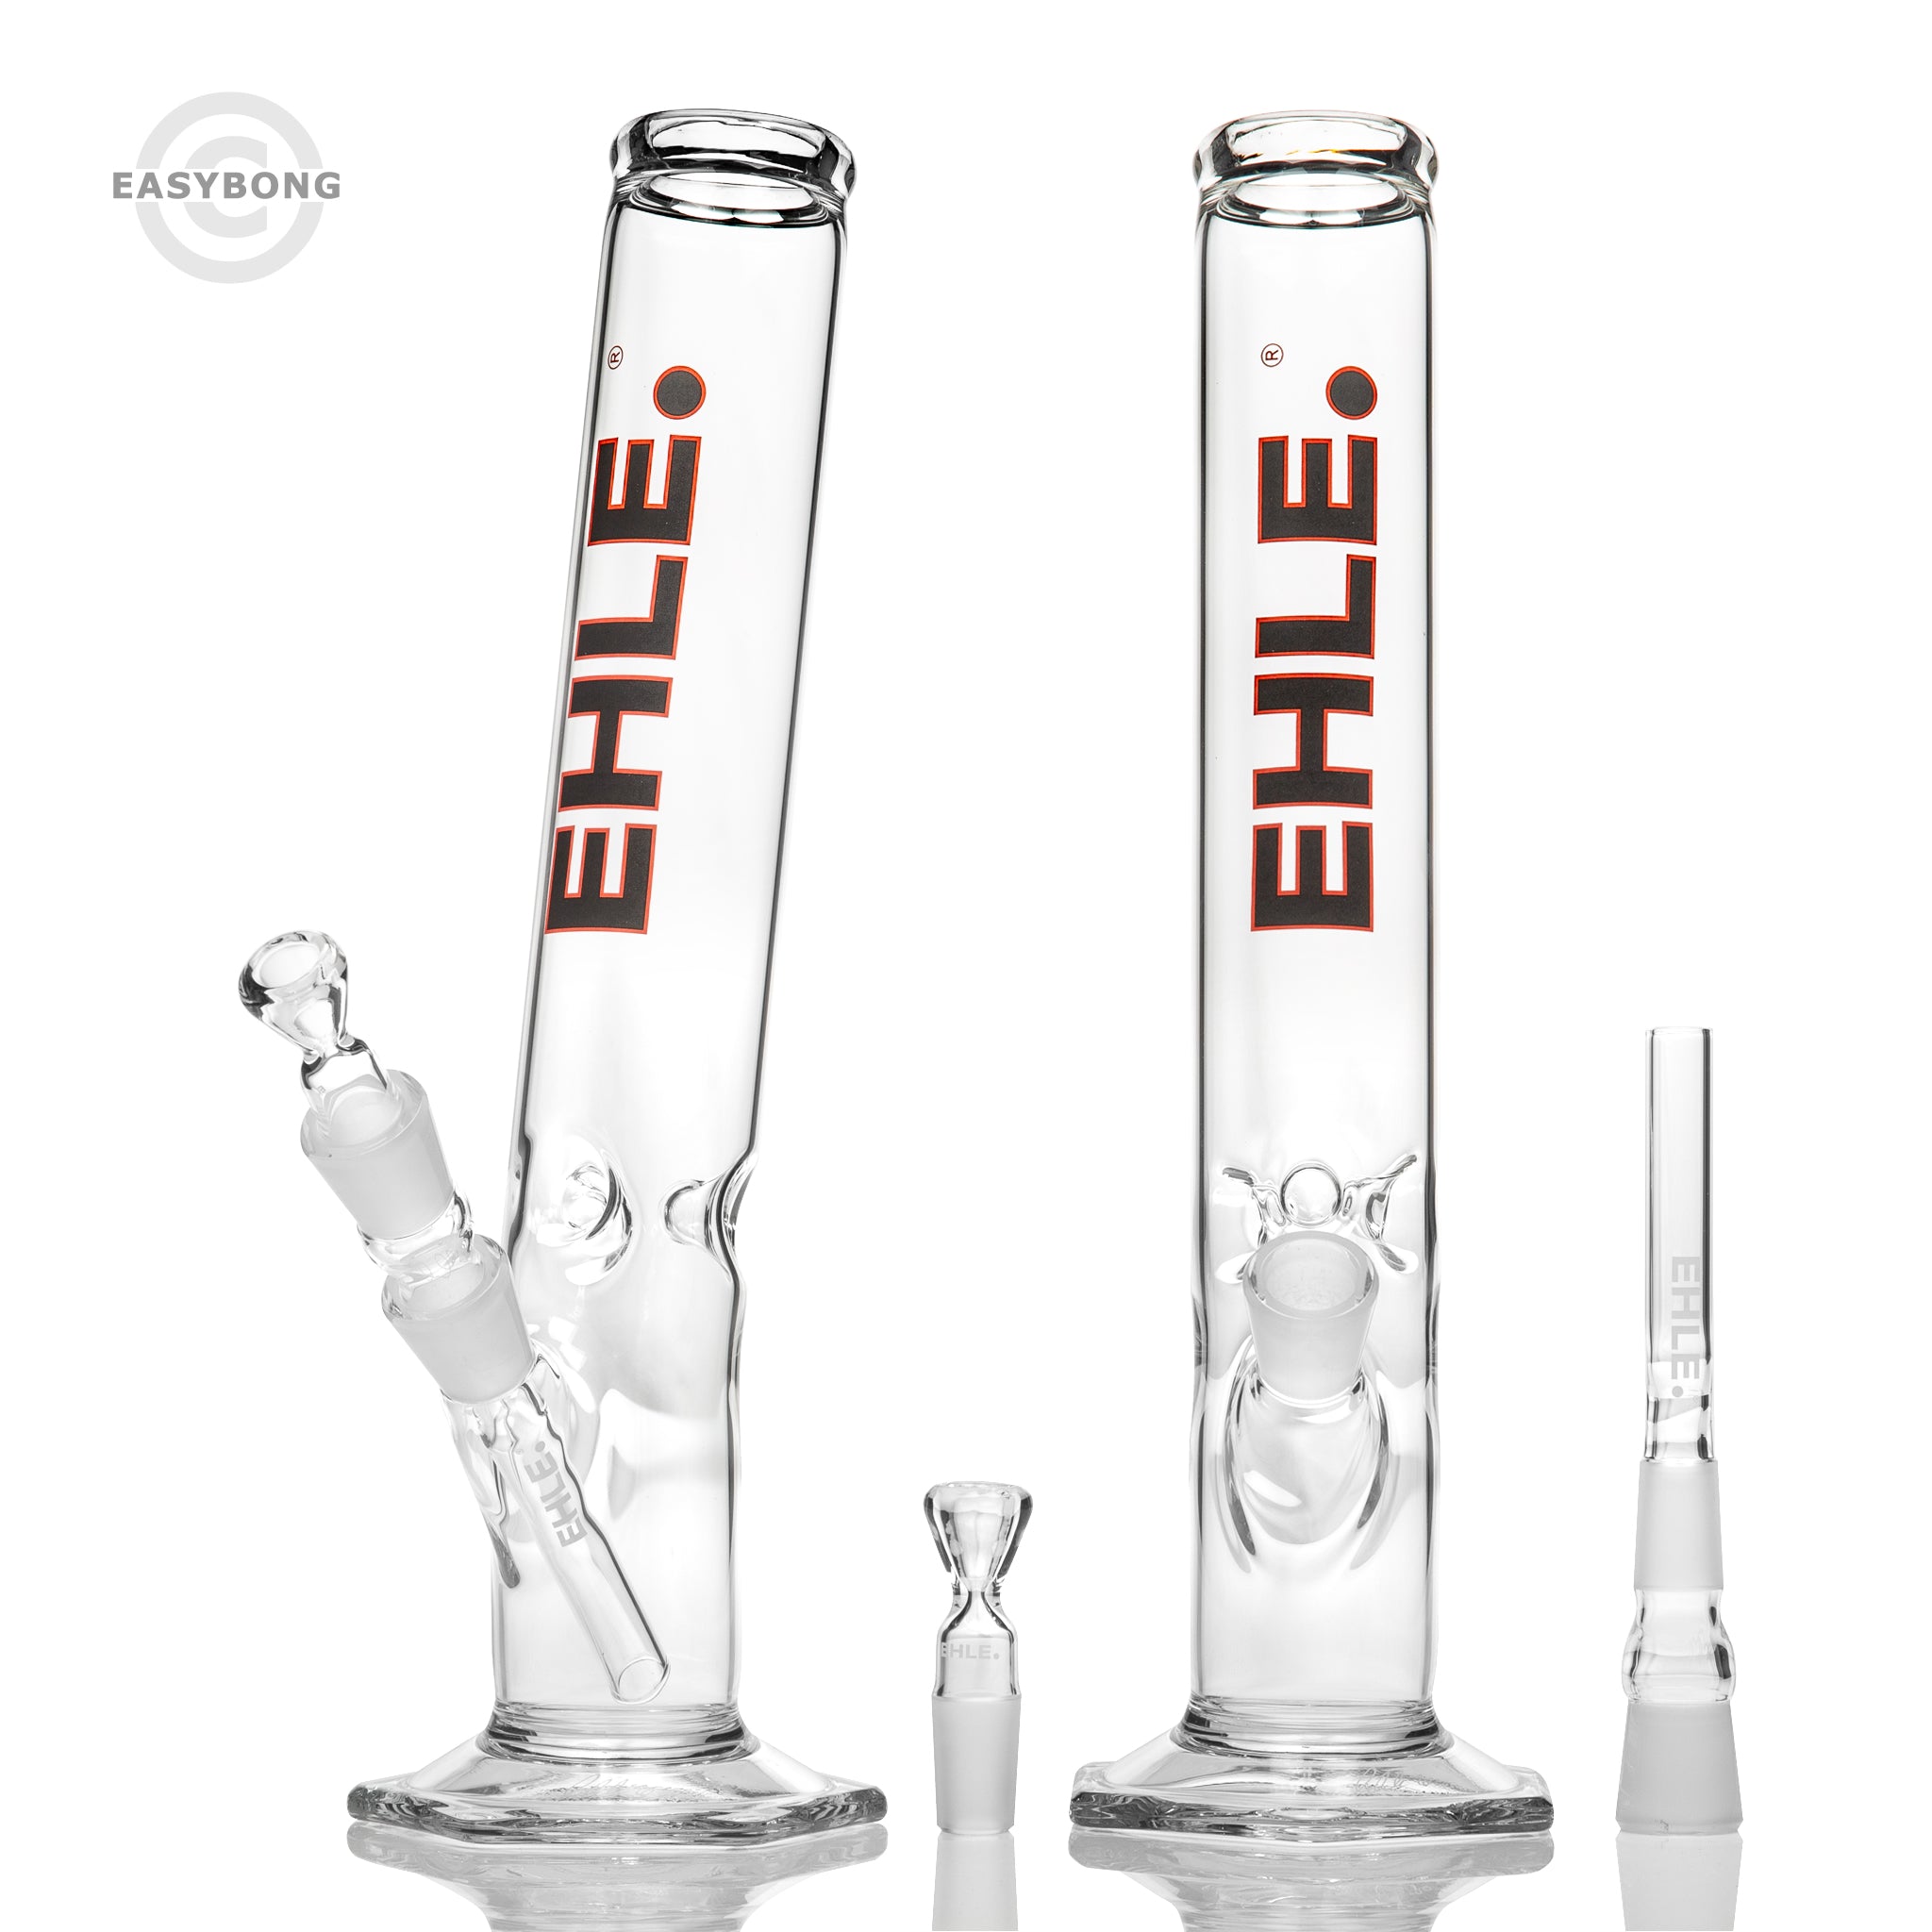 EHLE glass bongs and pipes at Easy Bong Australia.